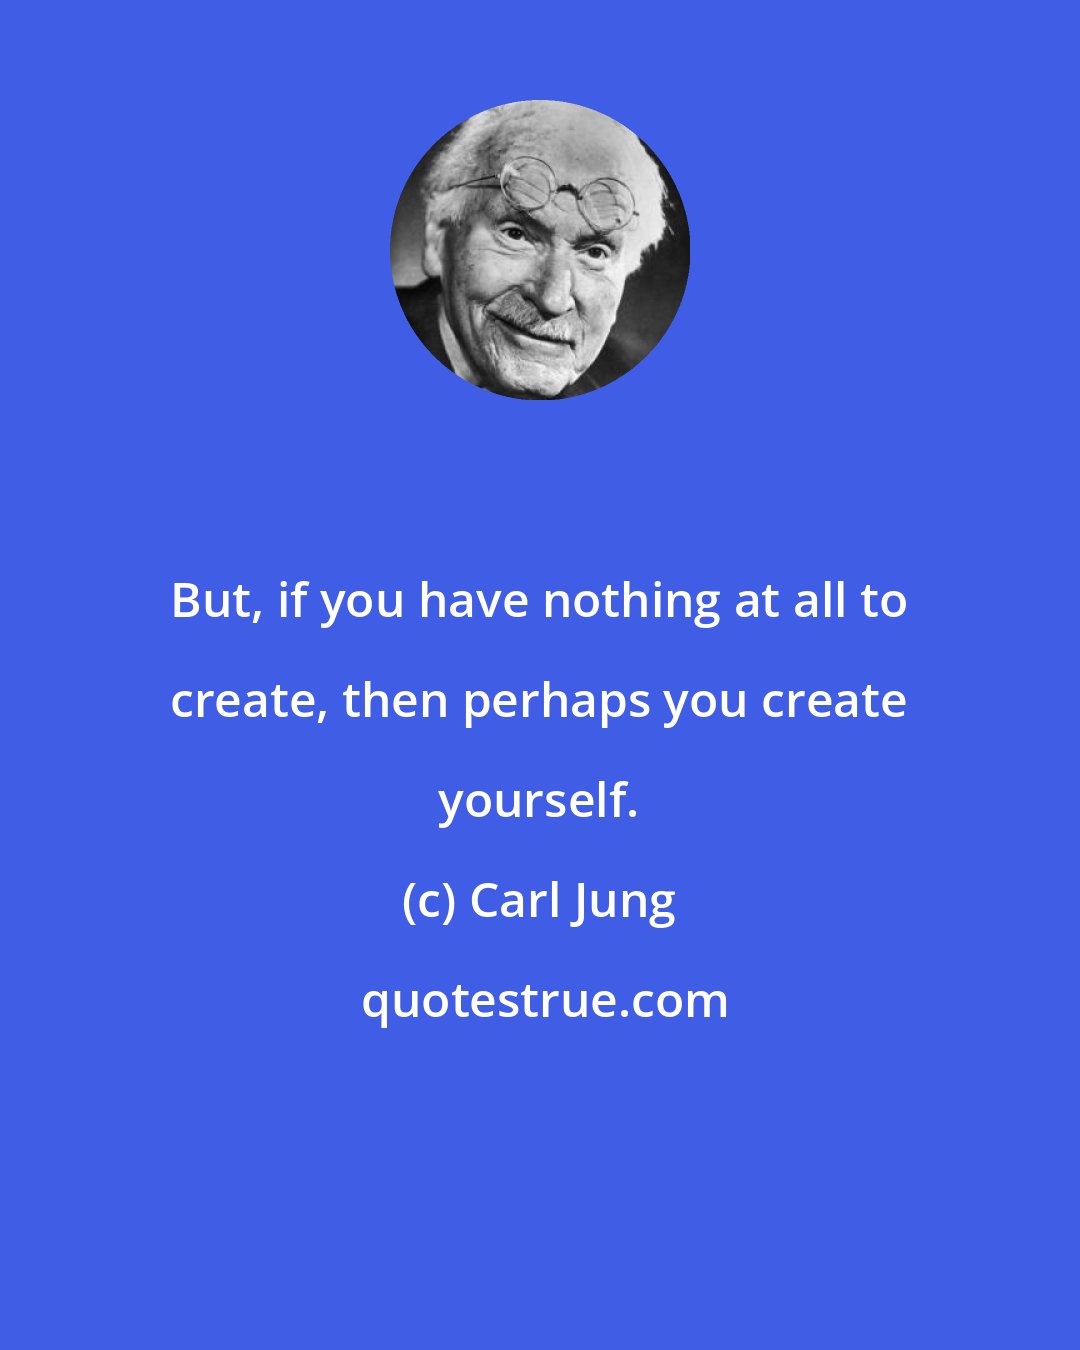 Carl Jung: But, if you have nothing at all to create, then perhaps you create yourself.